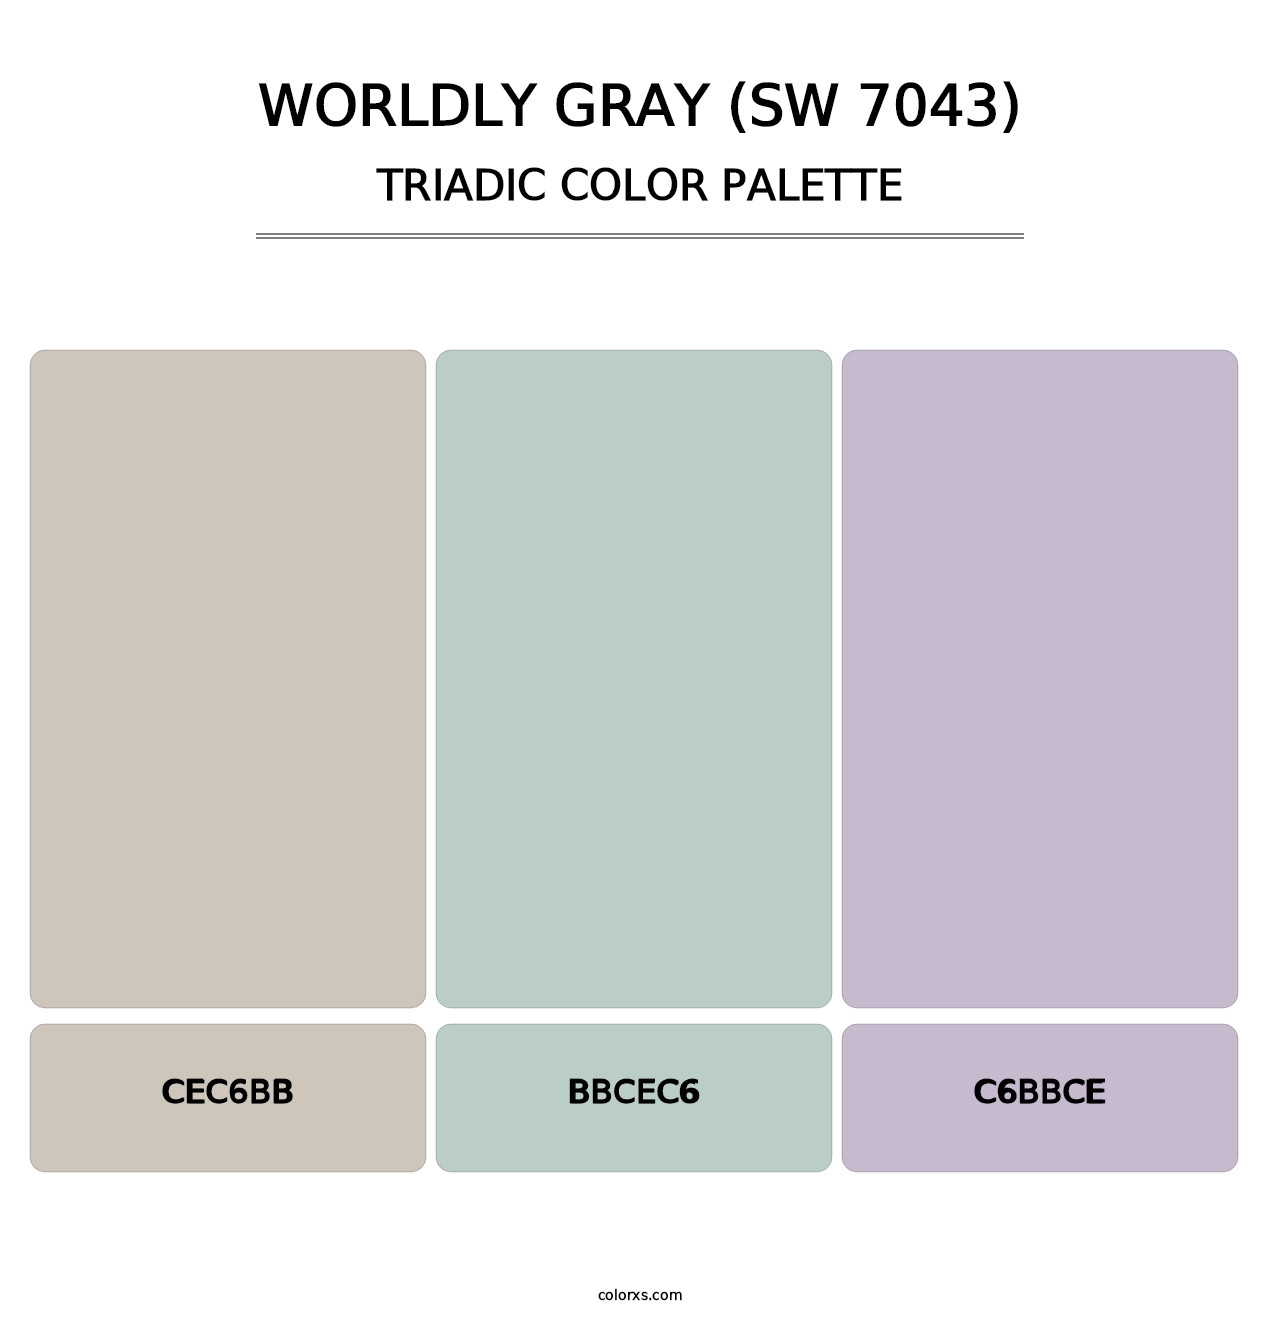 Worldly Gray (SW 7043) - Triadic Color Palette